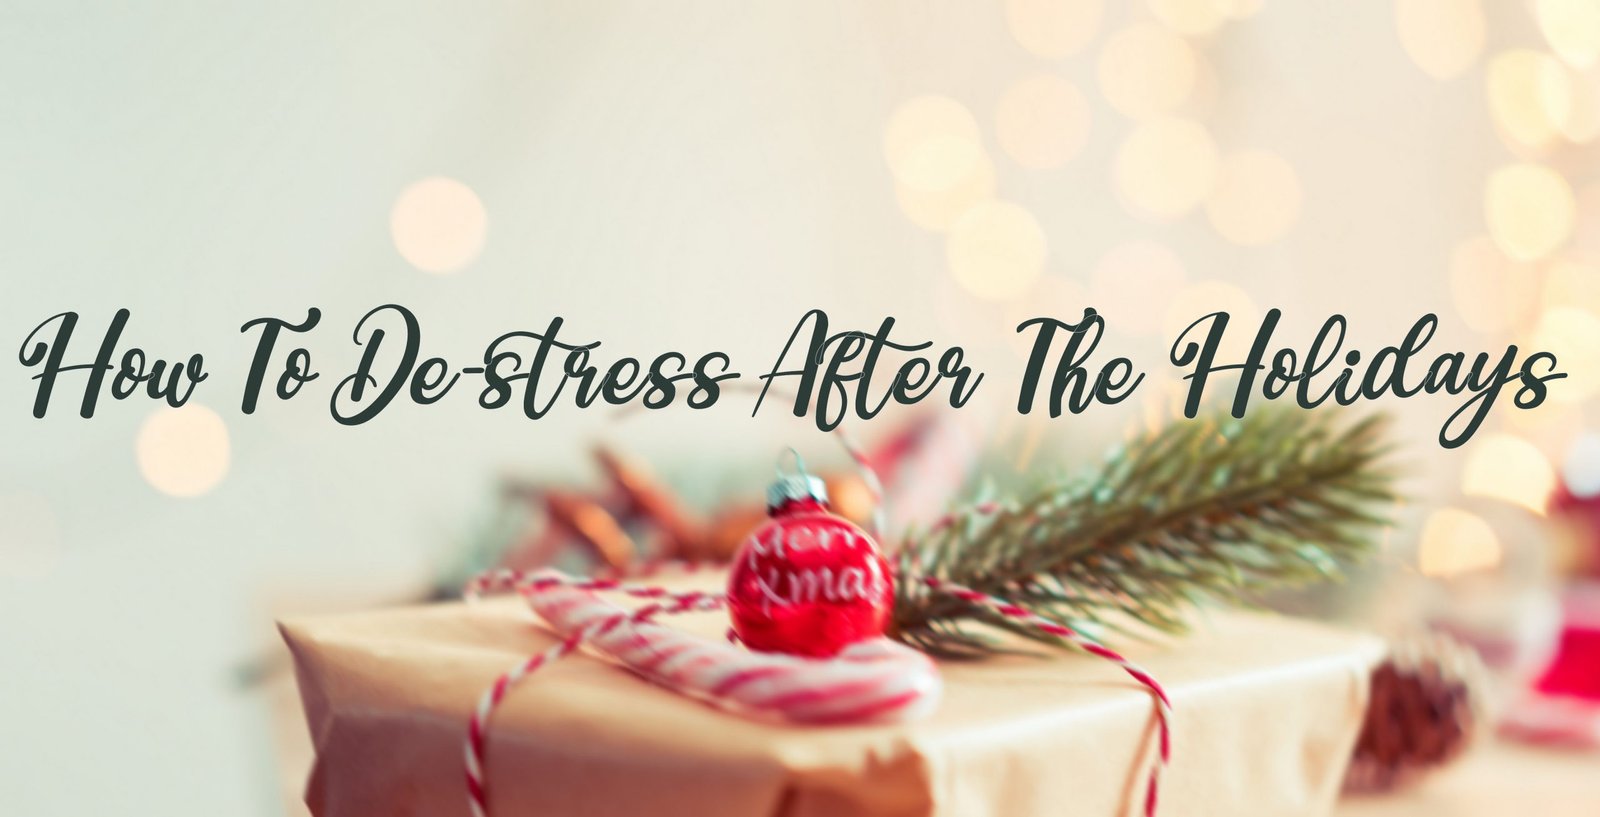 How to Relax and De-Stress After the Holidays